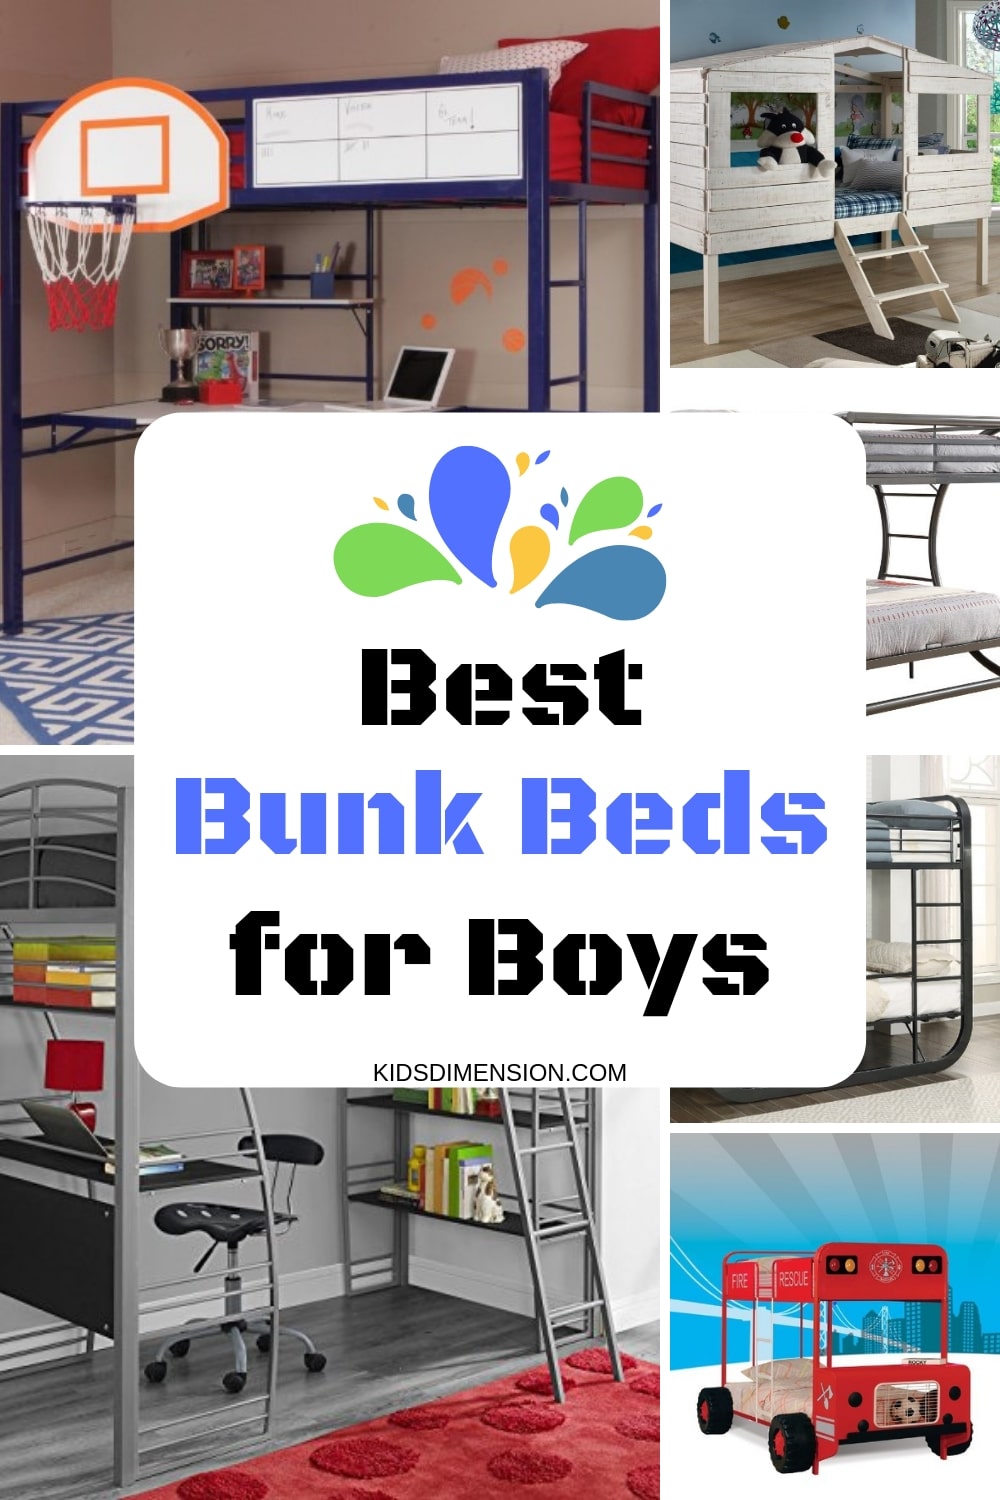 Best Bunk Beds for Boys